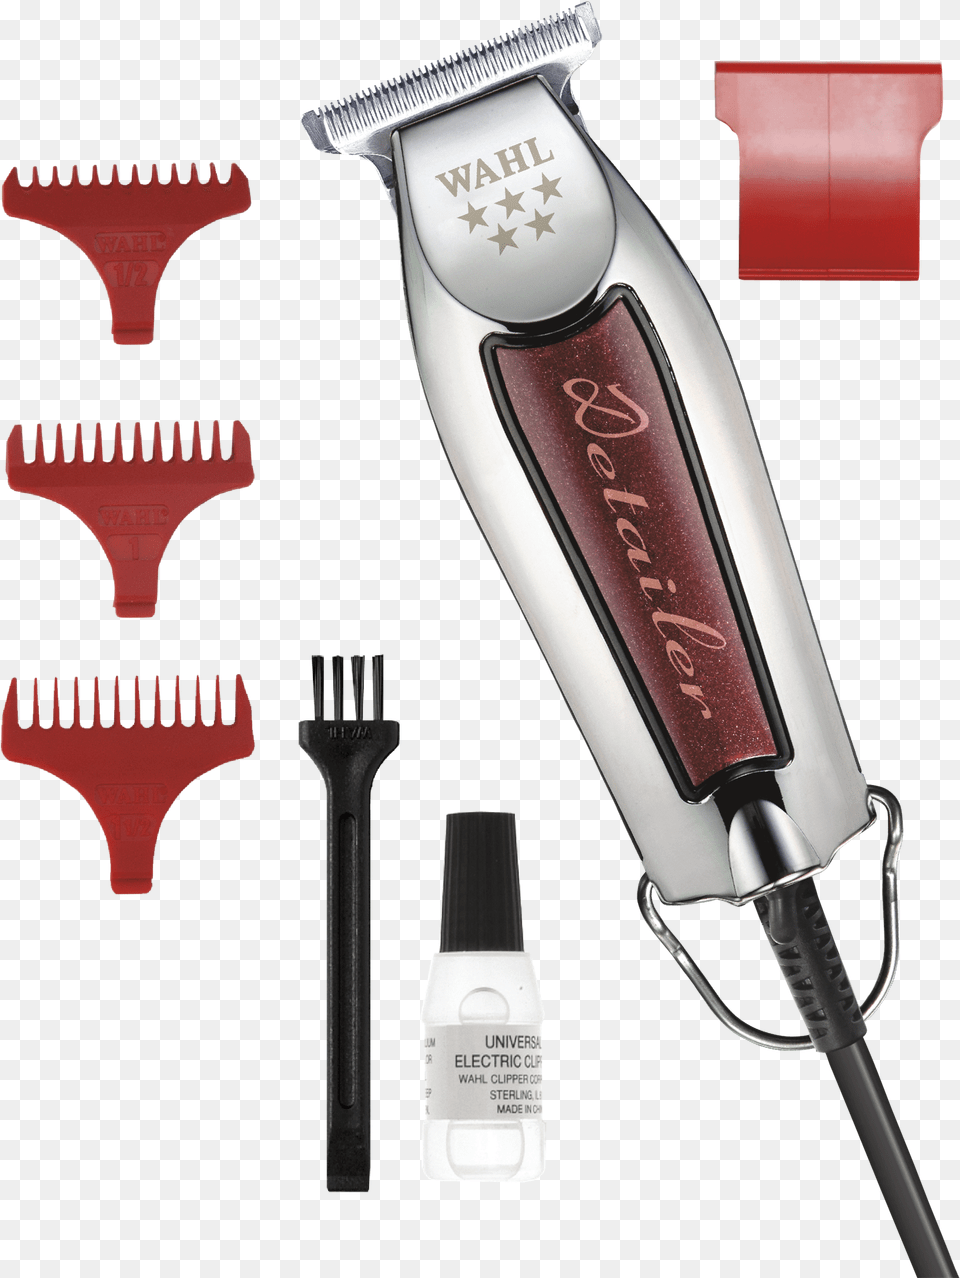 Wahl Wide Detailer Trimmer 916 5 Star Series Detailer Wahl, Blade, Razor, Weapon, Electrical Device Free Png